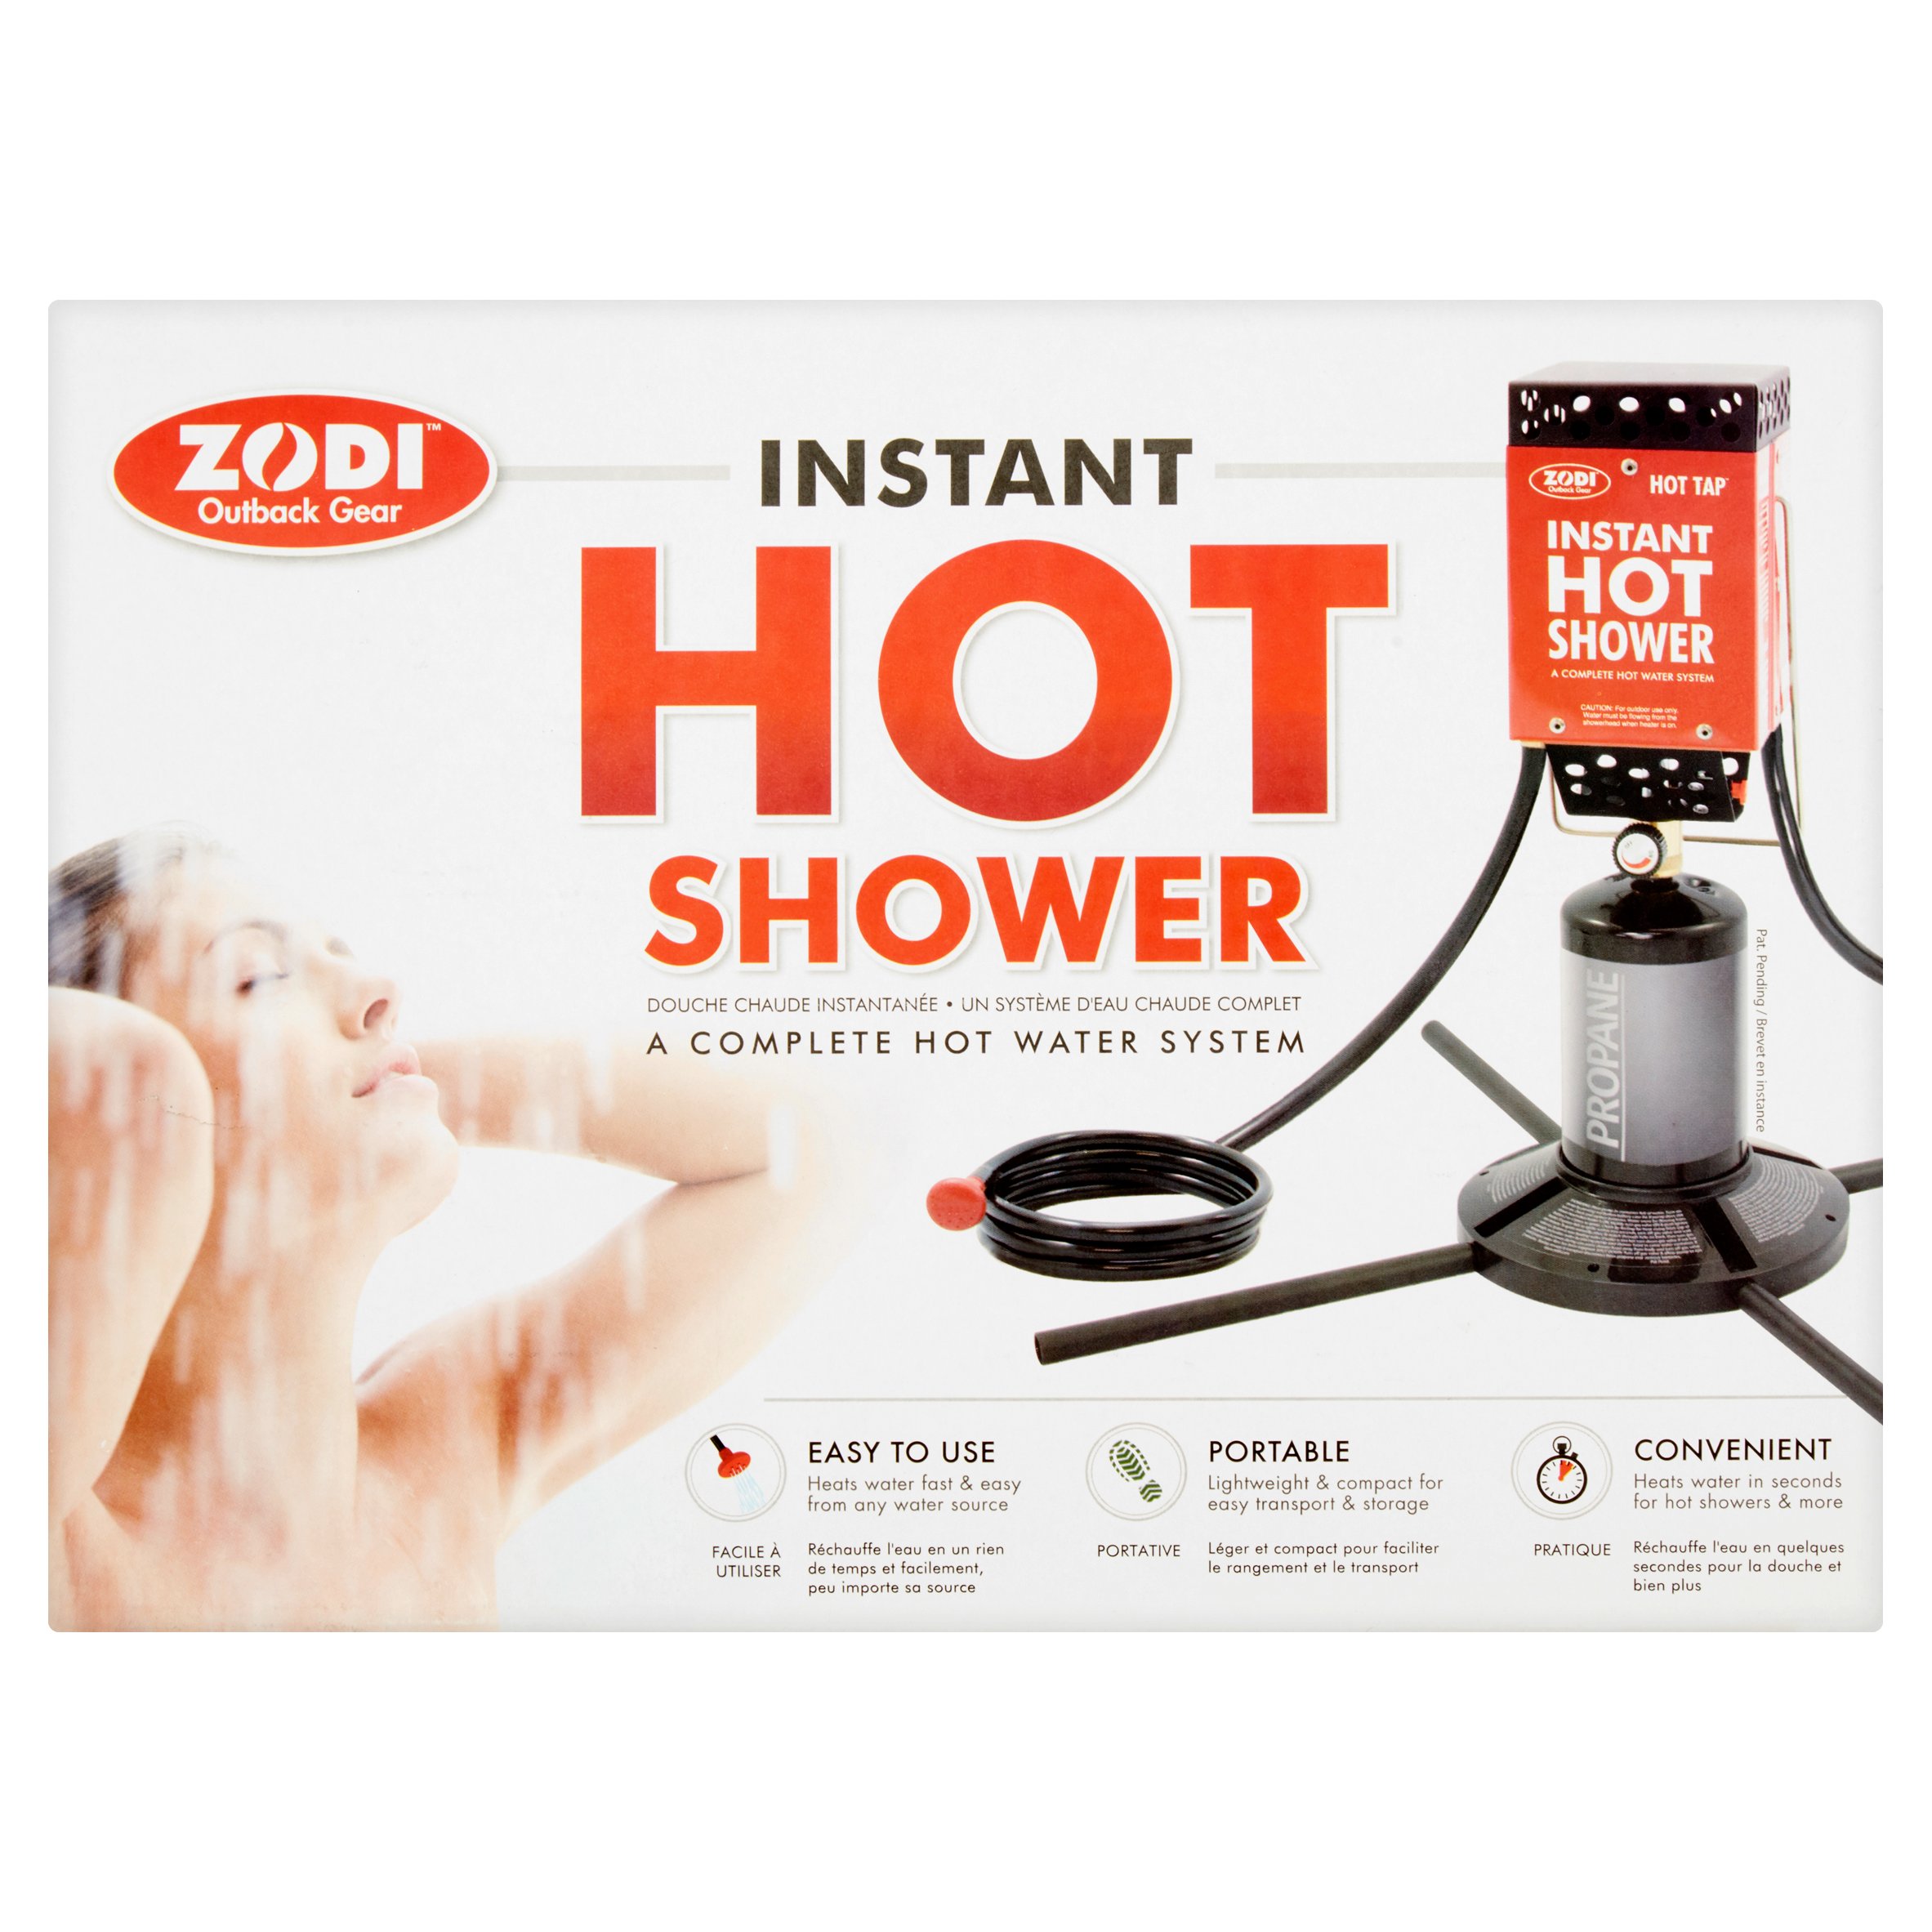 Zodi Outback Gear Instant Hot Shower - image 1 of 5